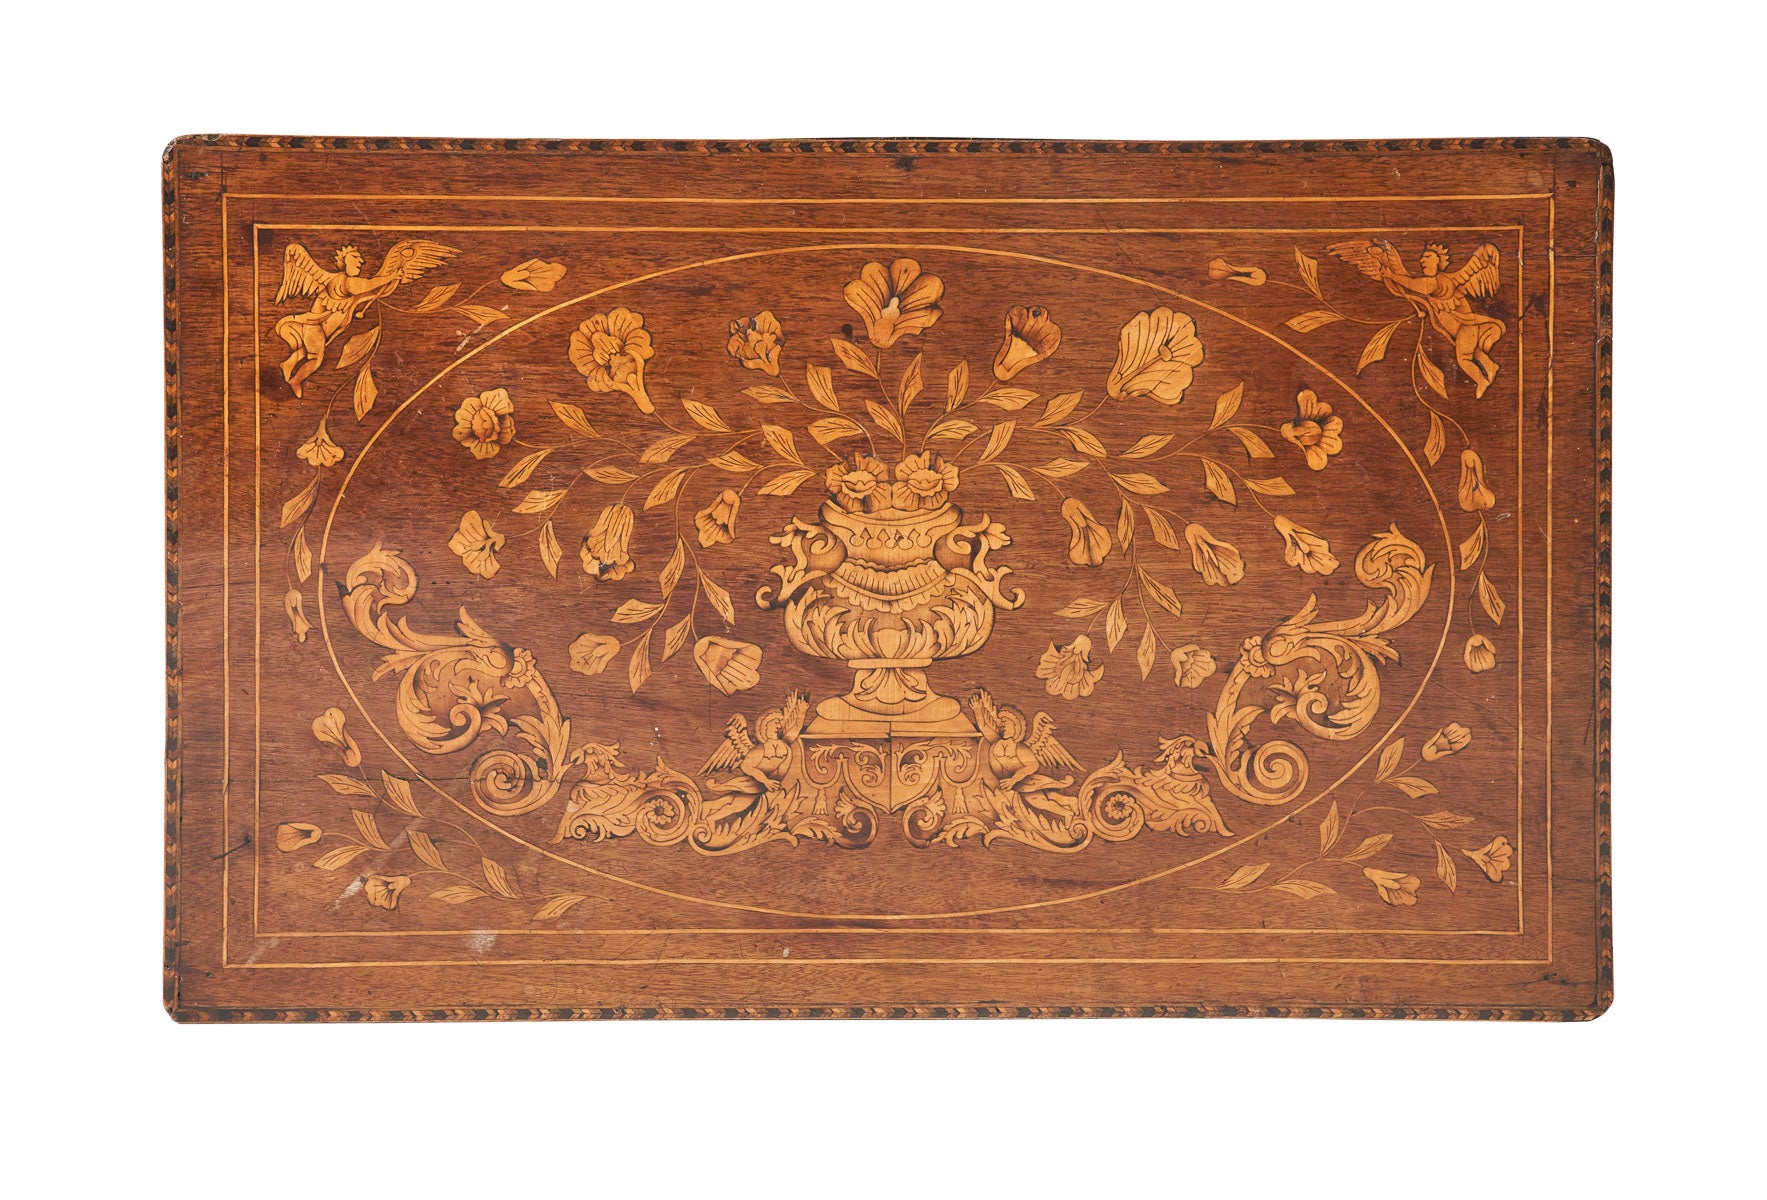 SOLD A very decorative and elegant marquetry writing table, Dutch 18th Century